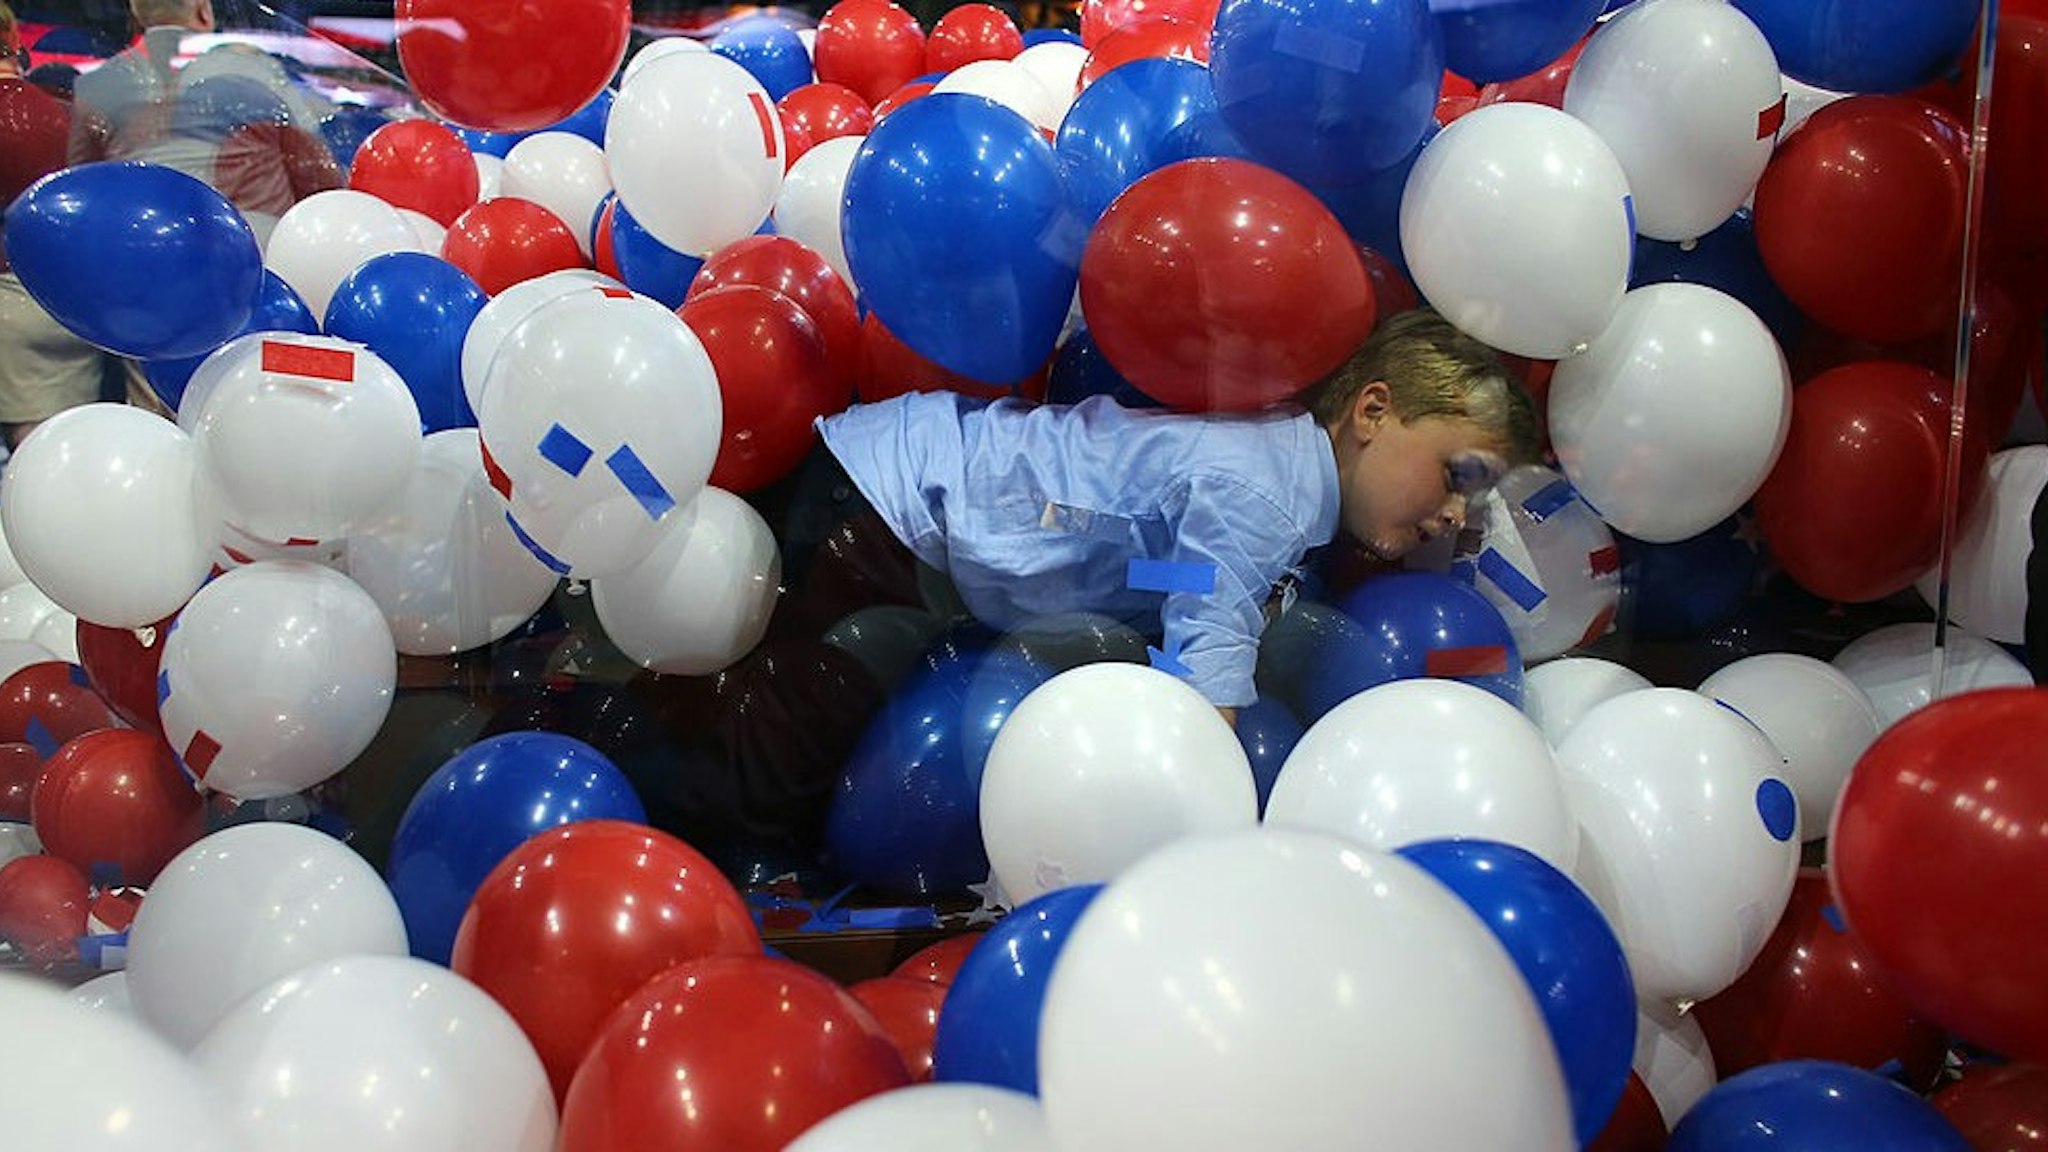 TAMPA, FL - AUGUST 30: A boy plays in the balloons after Republican presidential candidate, former Massachusetts Gov. Mitt Romney accepted the nomination during the final day of the Republican National Convention at the Tampa Bay Times Forum on August 30, 2012 in Tampa, Florida. Former Massachusetts Gov. Mitt Romney was nominated as the Republican presidential candidate during the RNC which will conclude today. (Photo by